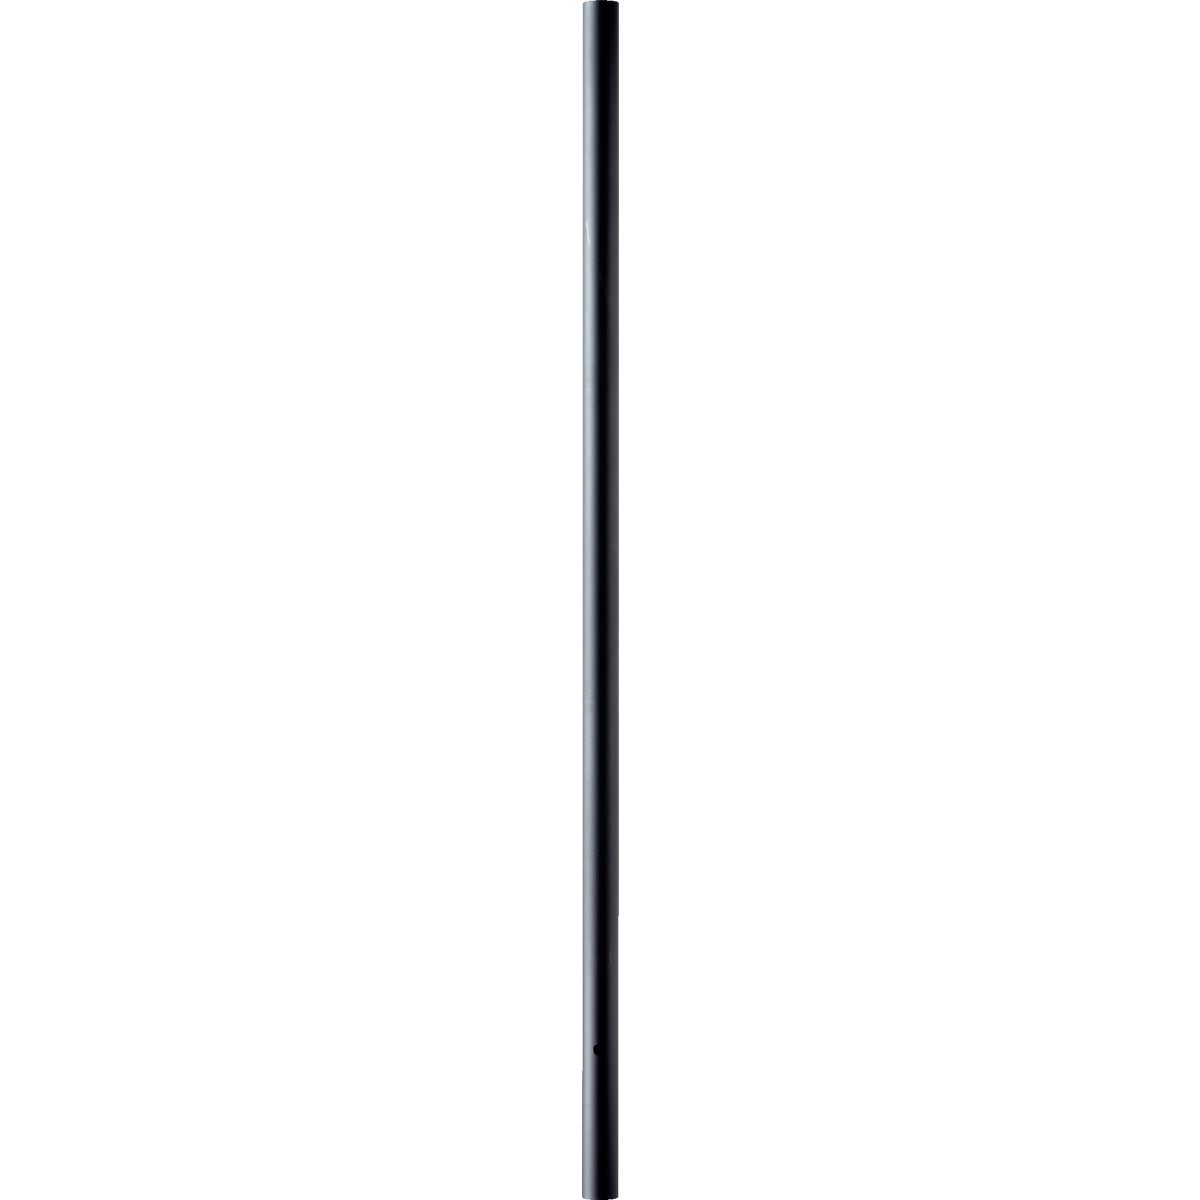 A Quorum International Direct Burial Lamp Post, designed for 3 inch decorative outdoor post lights. Enhance your home's curb appeal and add nighttime light with this UL Listed, wet location lamp post. 96"H, Gloss Black finish.